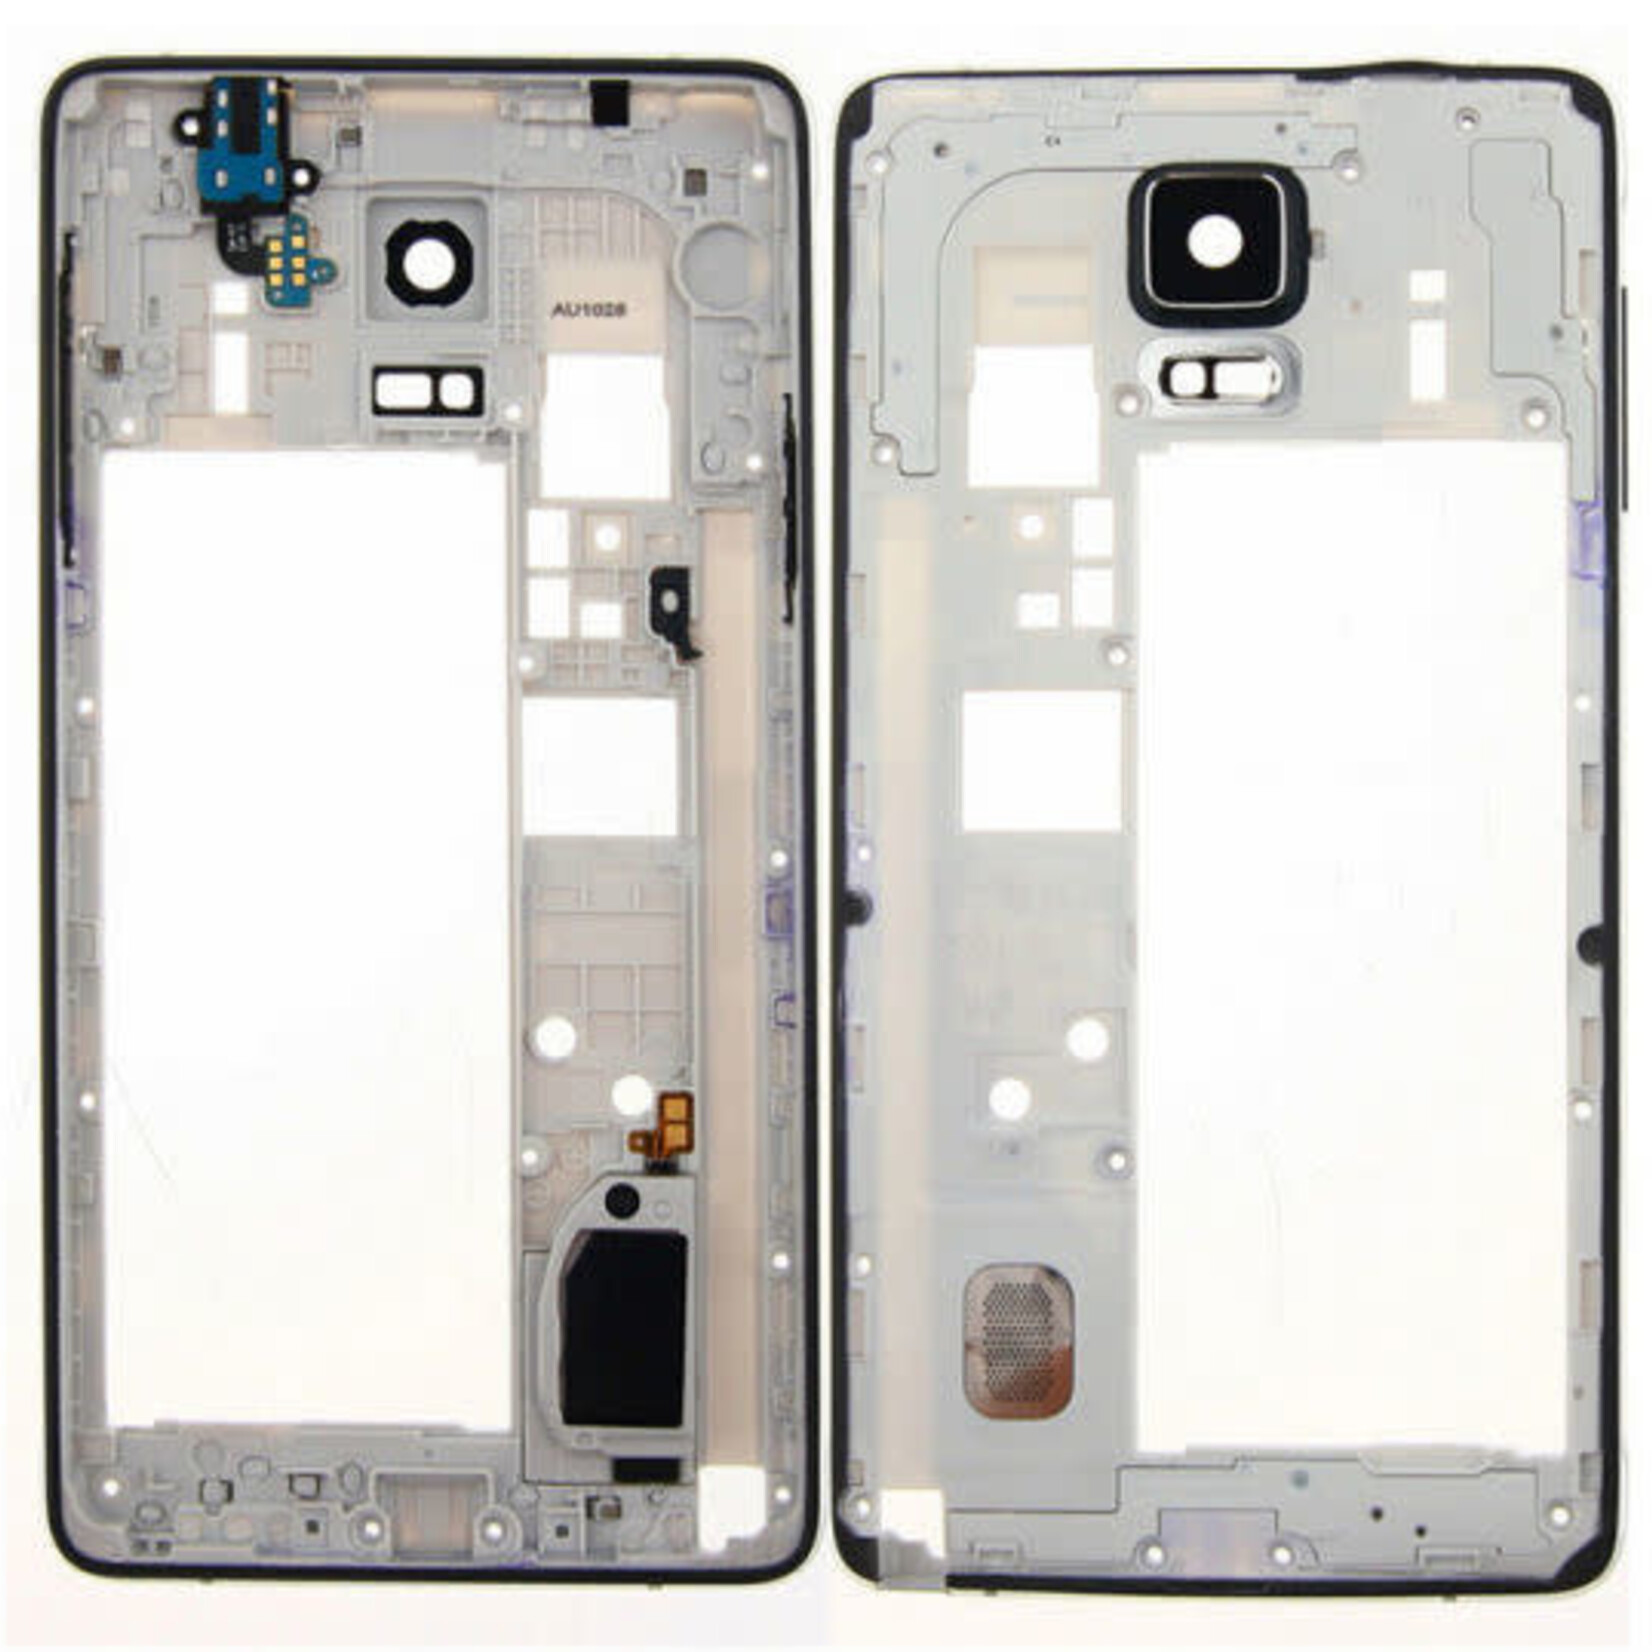 Samsung MID FRAME HOUSING FOR SAMSUNG GALAXY NOTE 4